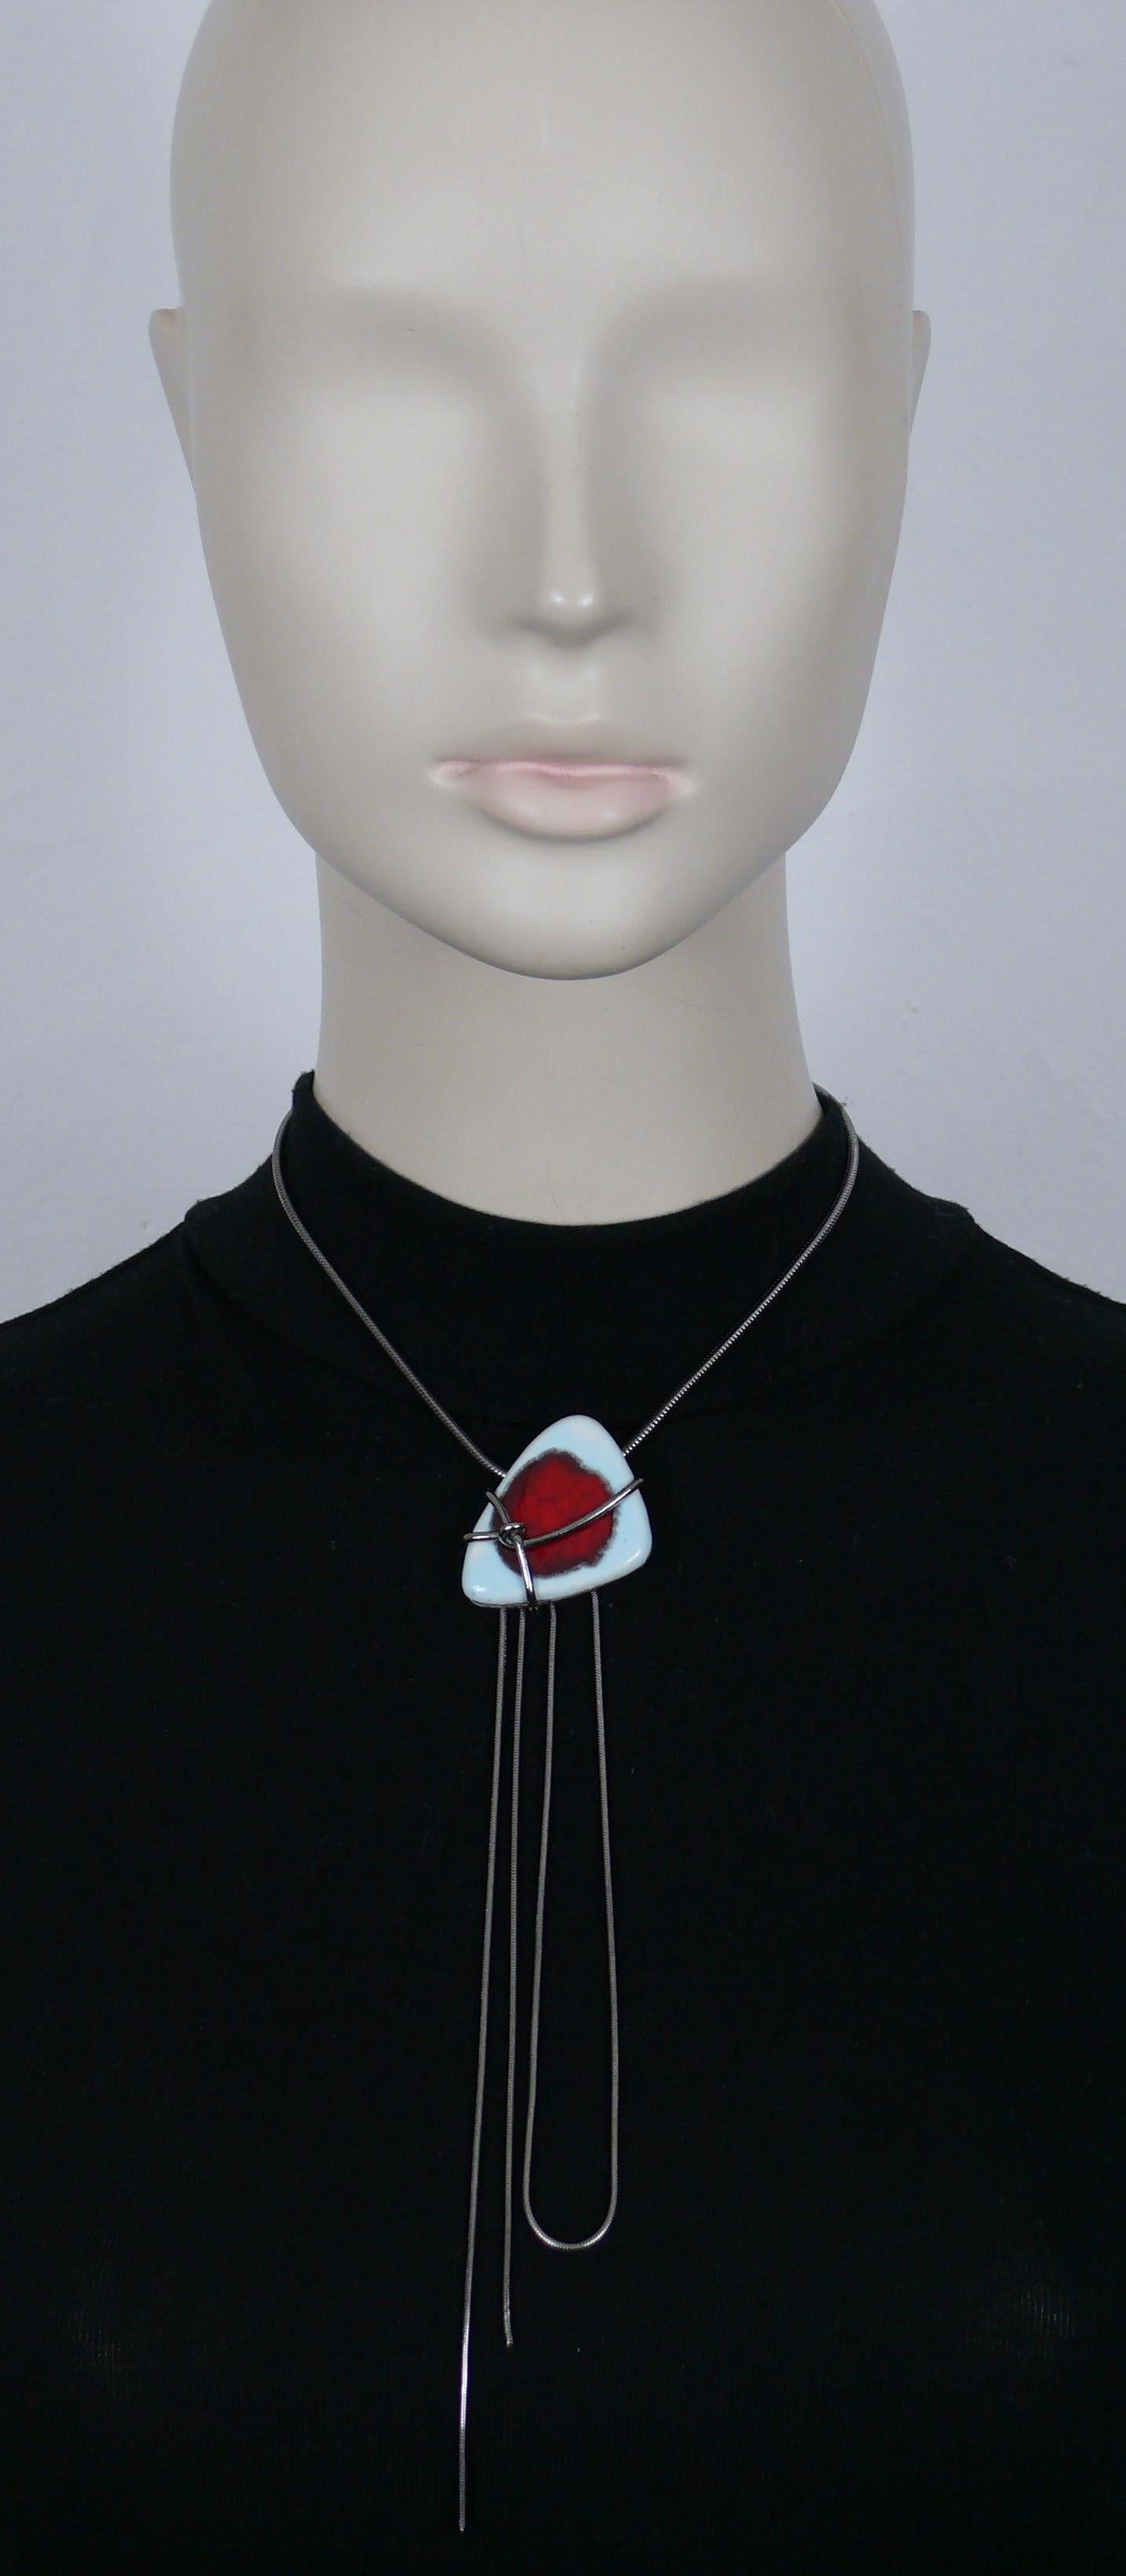 JEAN PAUL GAULTIER modernist gun tone snake chain necklace featuring a free form ceramic pebble pendant.

Embossed JEAN PAUL GAULTIER.

Indicative measurements : length approx. 32 cm (12.60 inches).

Material : Gun patina tone metal hardware /